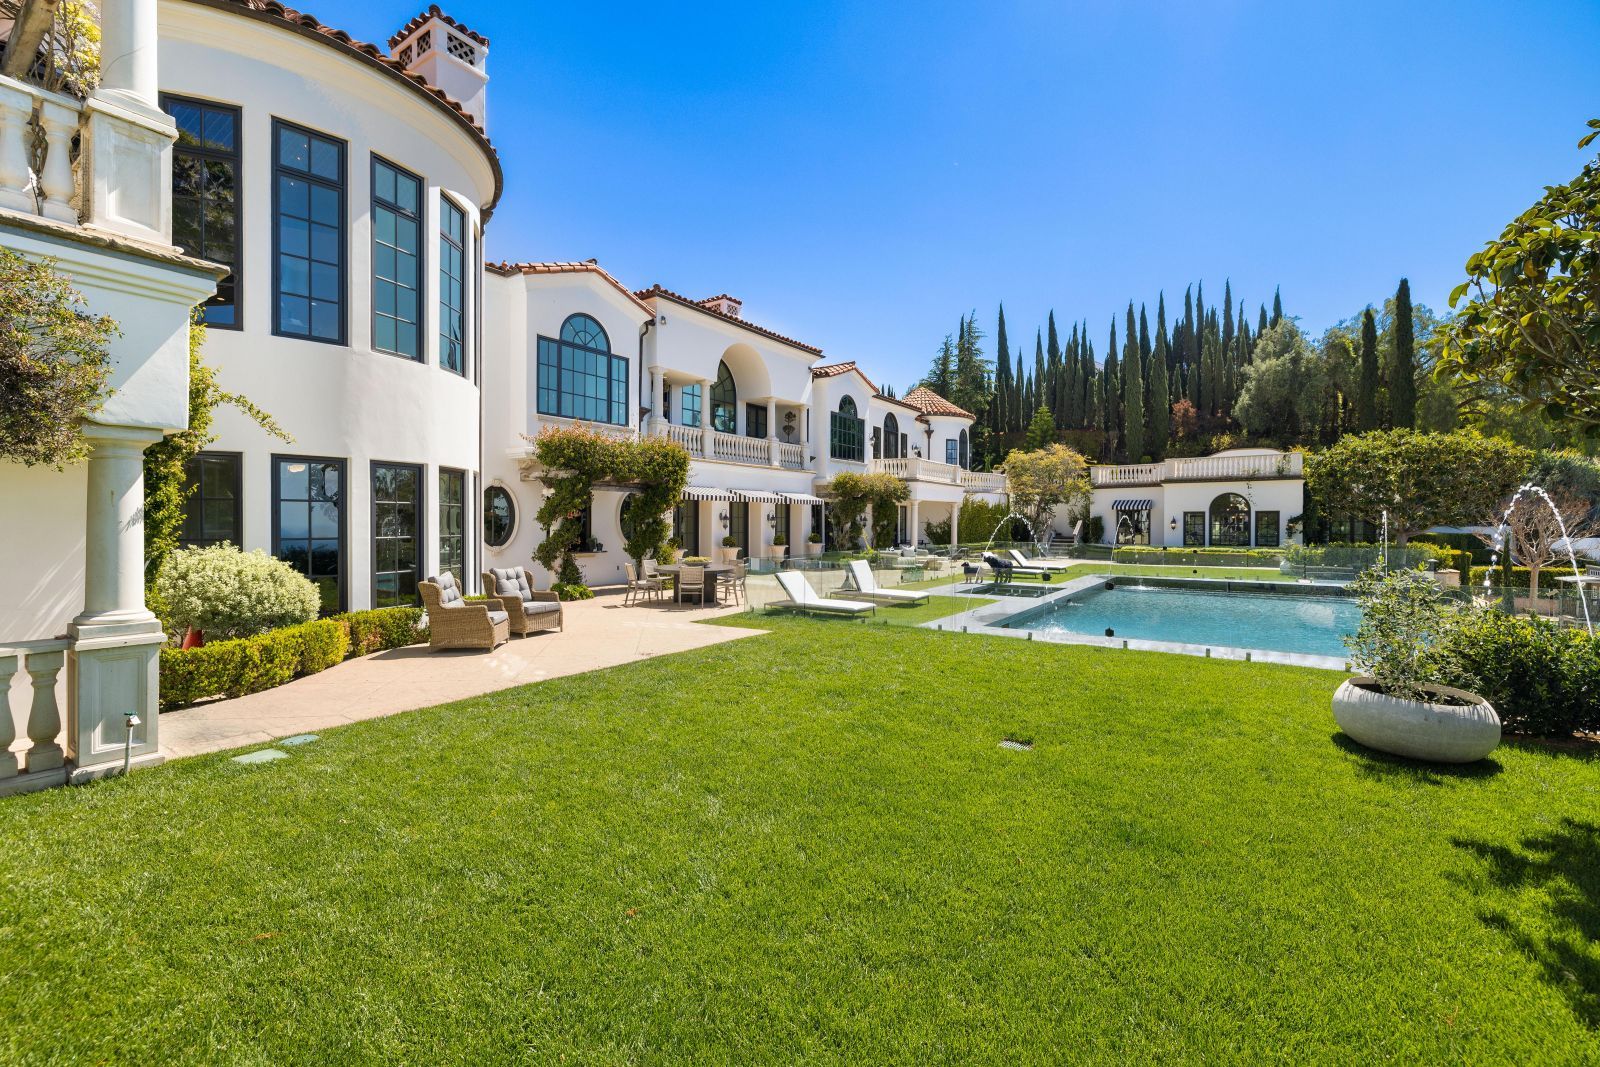 The backyard of a spectacular Montecito estate with green grass surrounding a pool, with a portion of the Meditshowingerranean style home